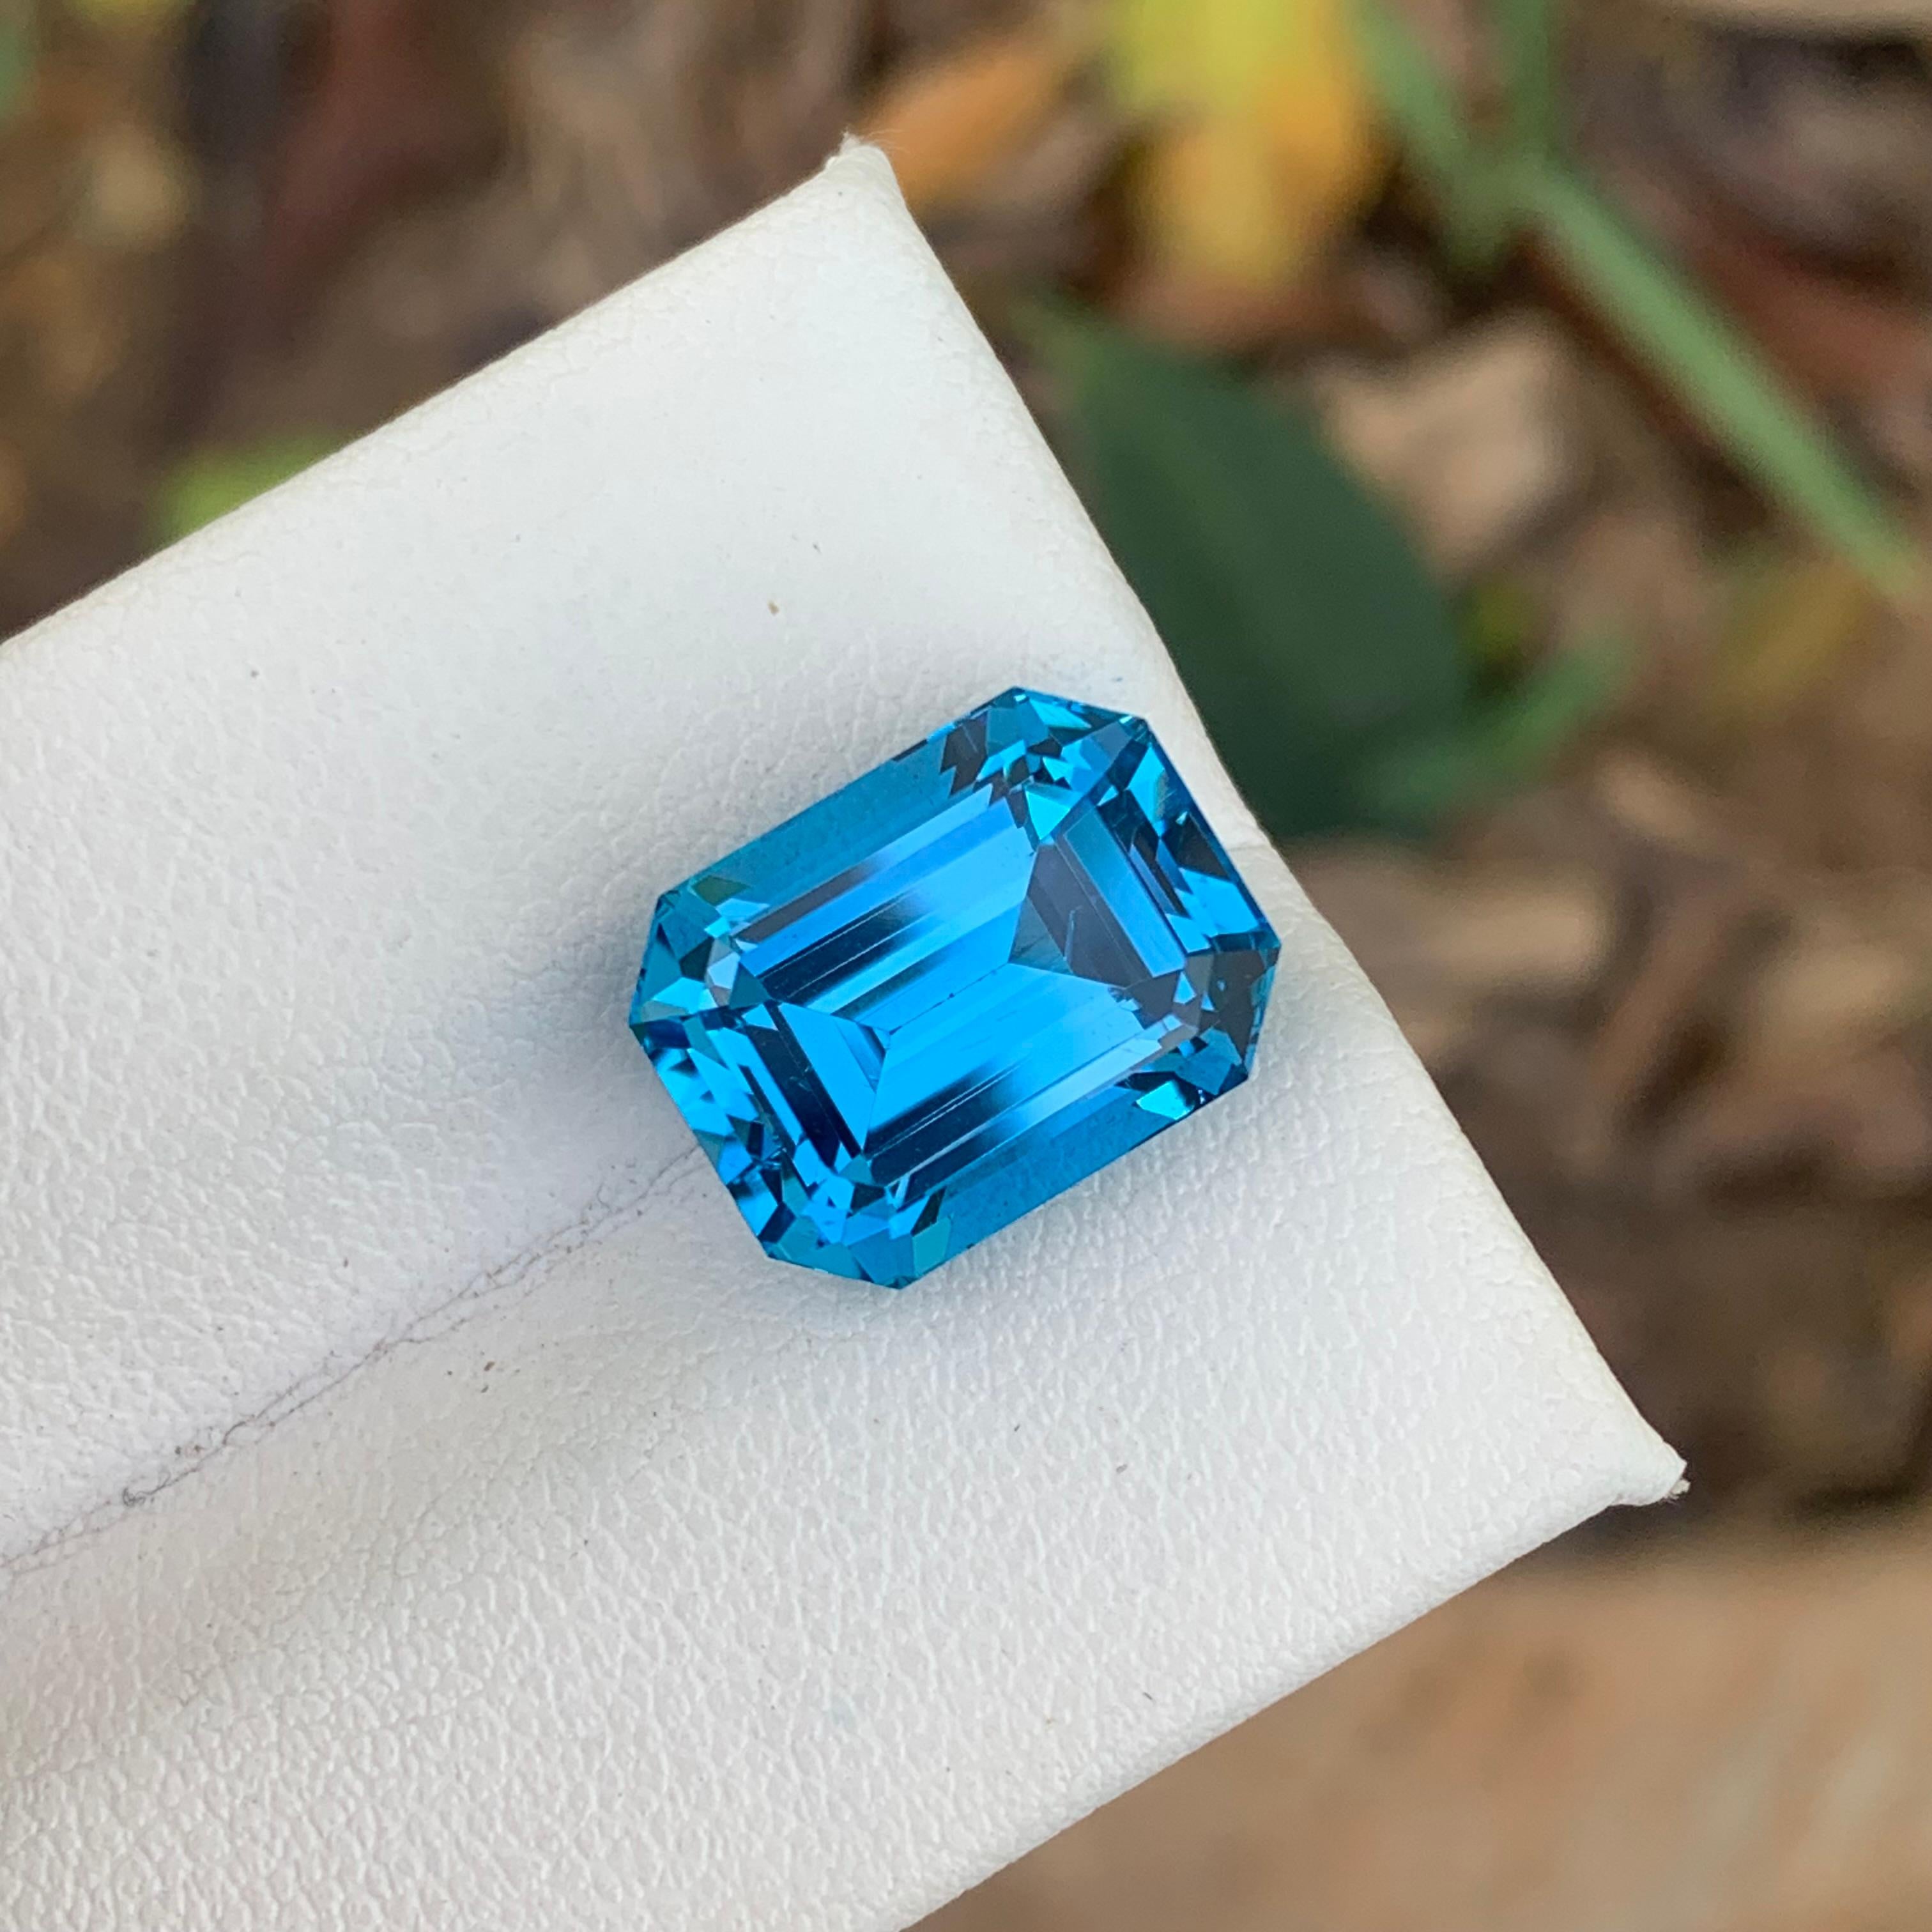 Faceted Electric Blue Topaz
Weight : 9.85 Carats
Dimensions : 12.6x9.6x8.5 Mm
Origin : Brazil
Clarity : Loupe Clean
Shape: Emerald
Color: Intense Blue
Certificate: On Demand
Blue Topaz Metaphysical Properties
Blue topaz, in particular, is believed